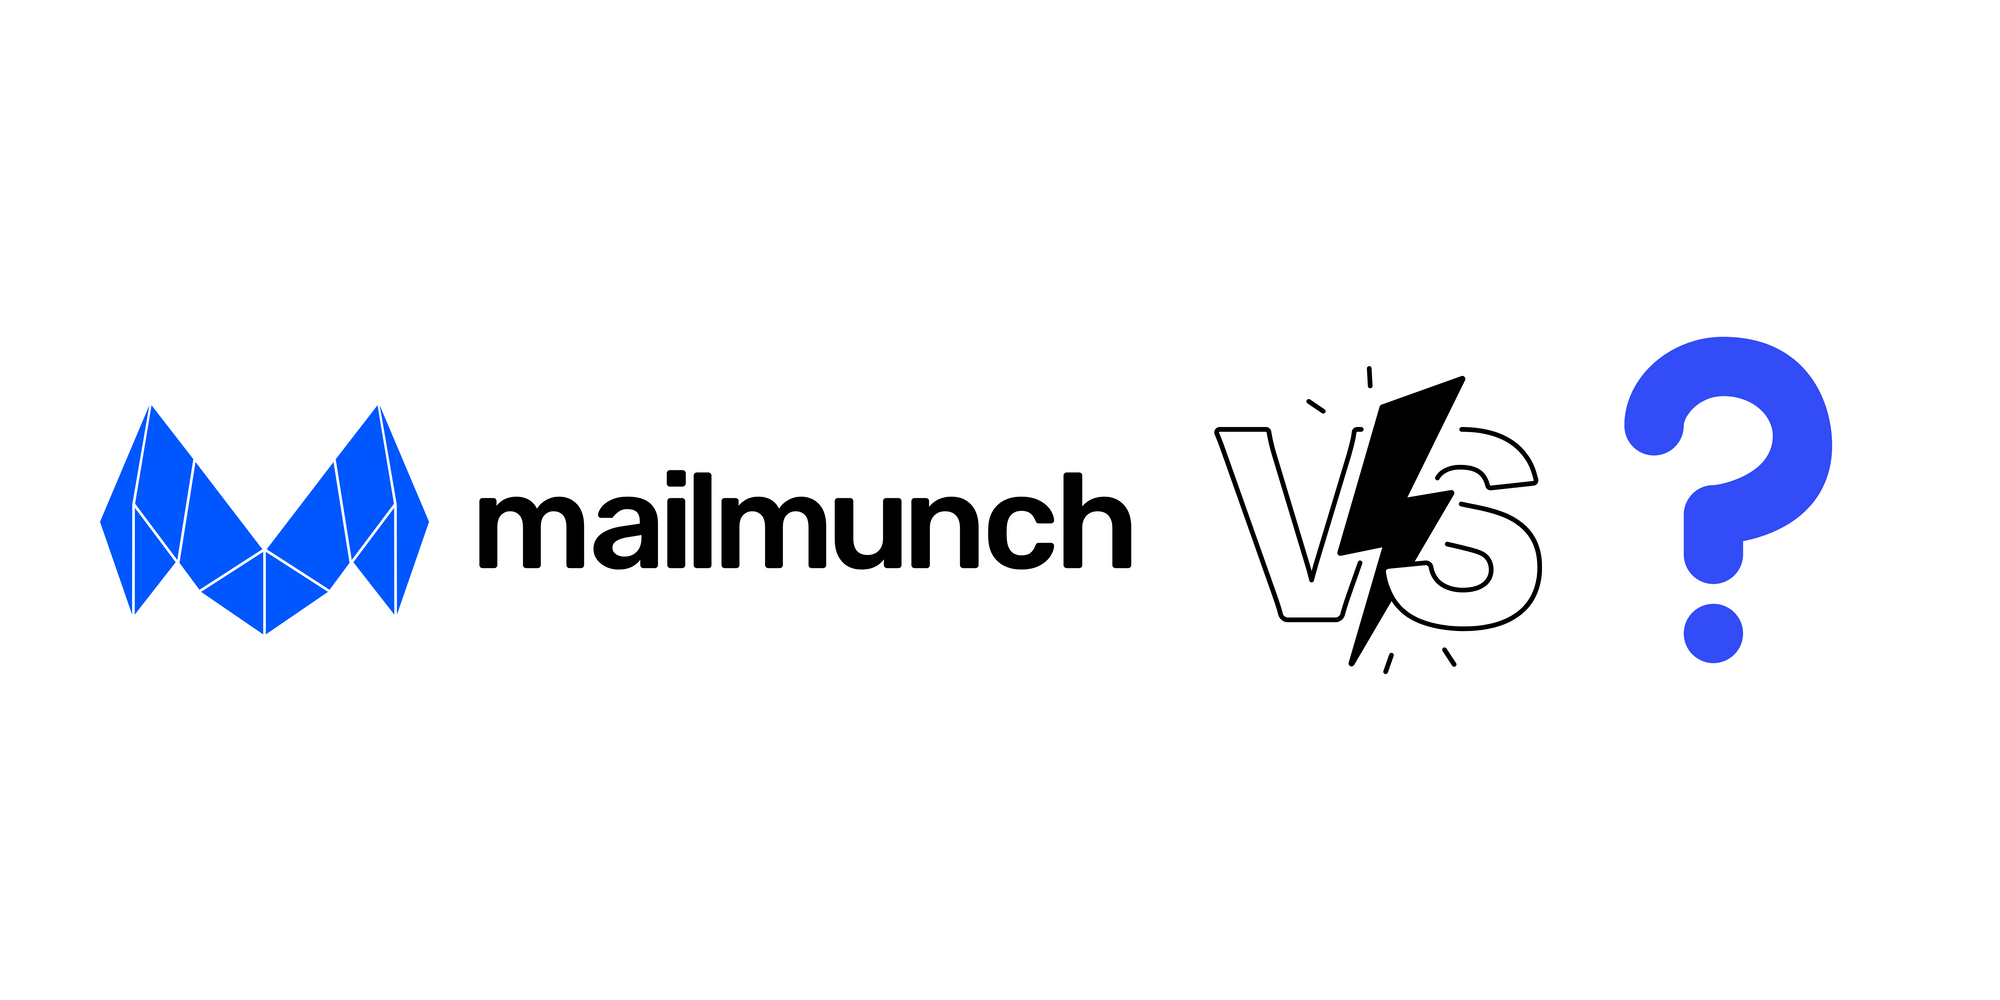 Mailmunch icon, versus symbol and a question mark to mention the alternatives on white background